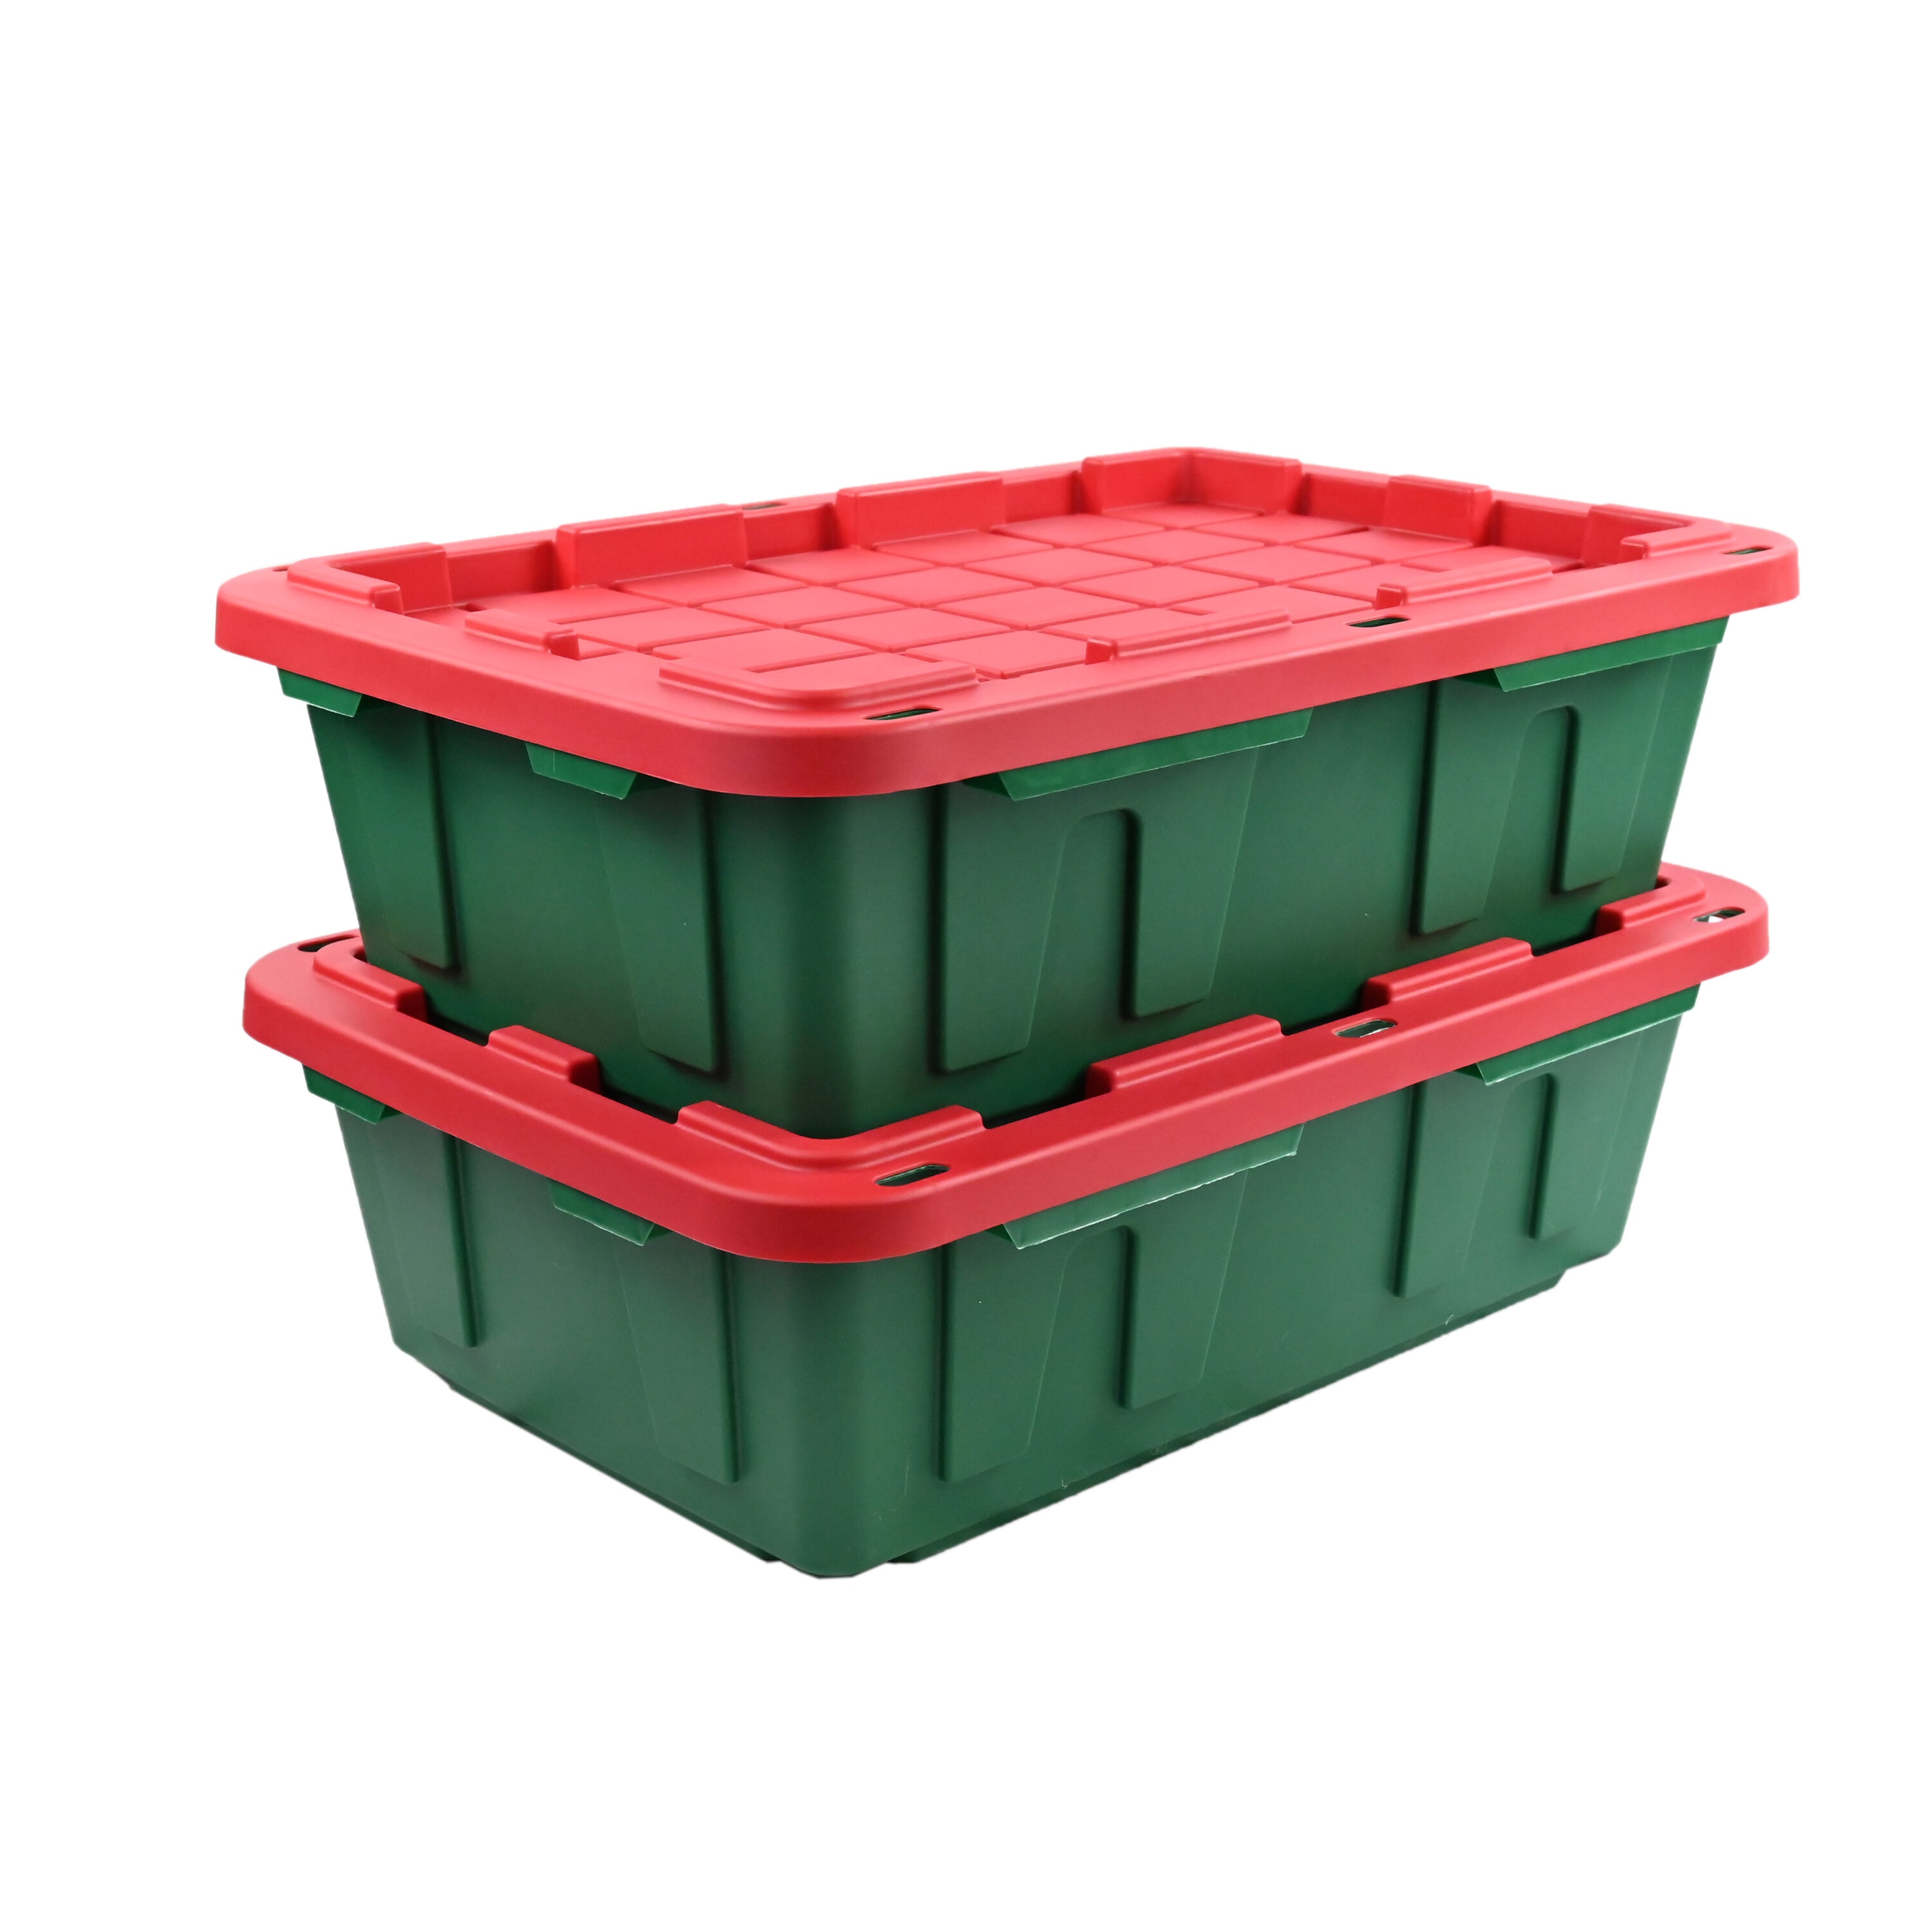 HOMZ Set of 3 Holiday Wreath Plastic Storage Containers, Holds Up to 24”  Diameter, Secure Latching Lid and Easy Grip Handle, Stackable, Red/Clear